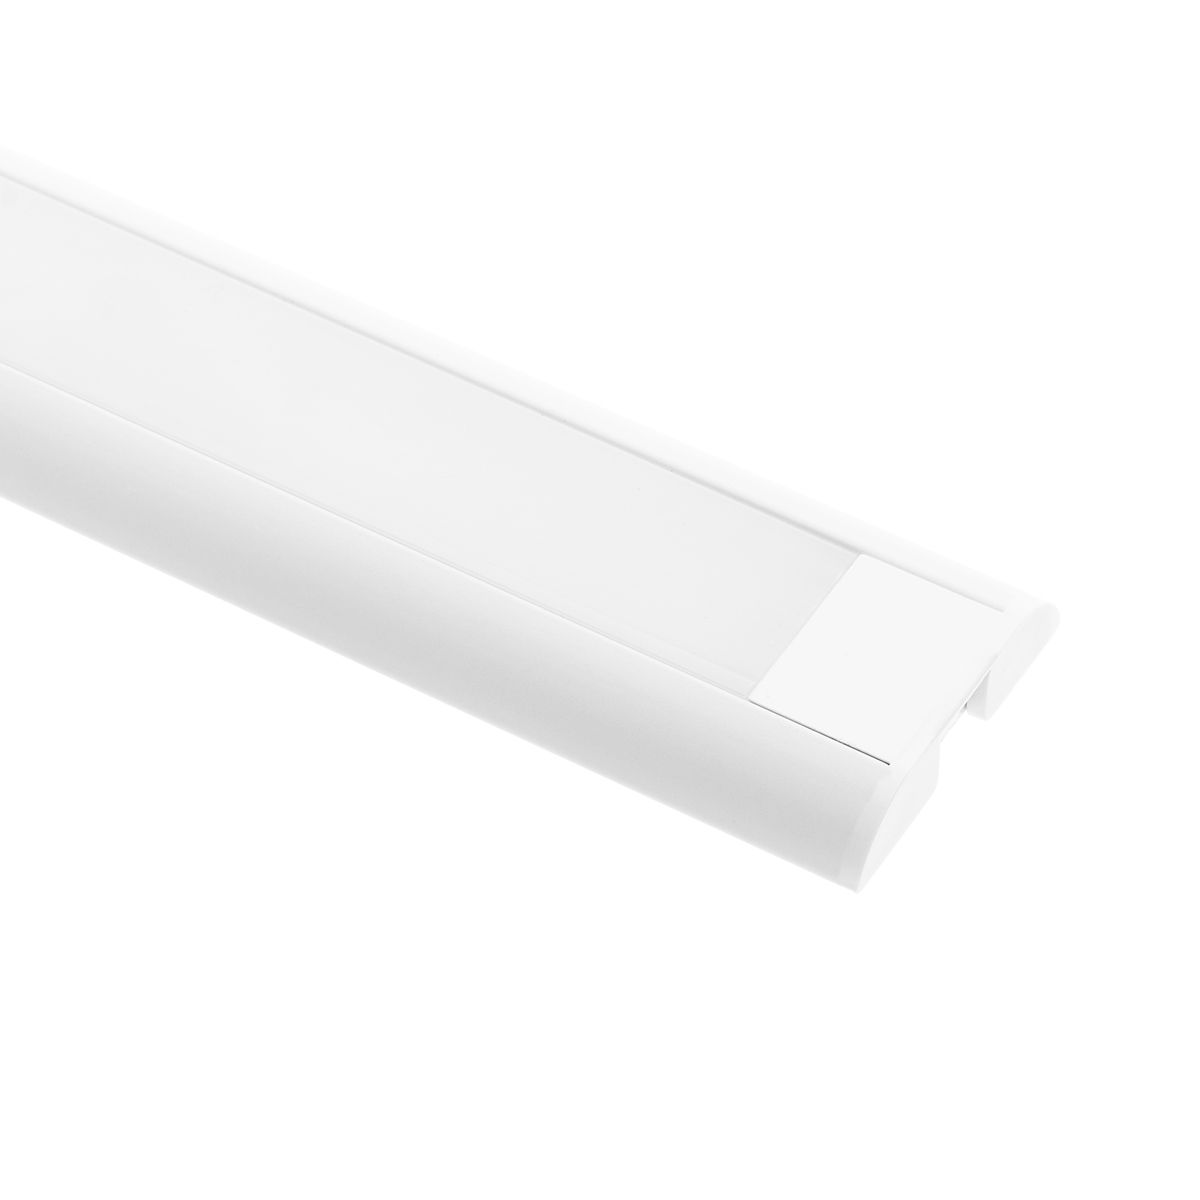 White LED Strip Profiles for Finnish Company - Enhance Your